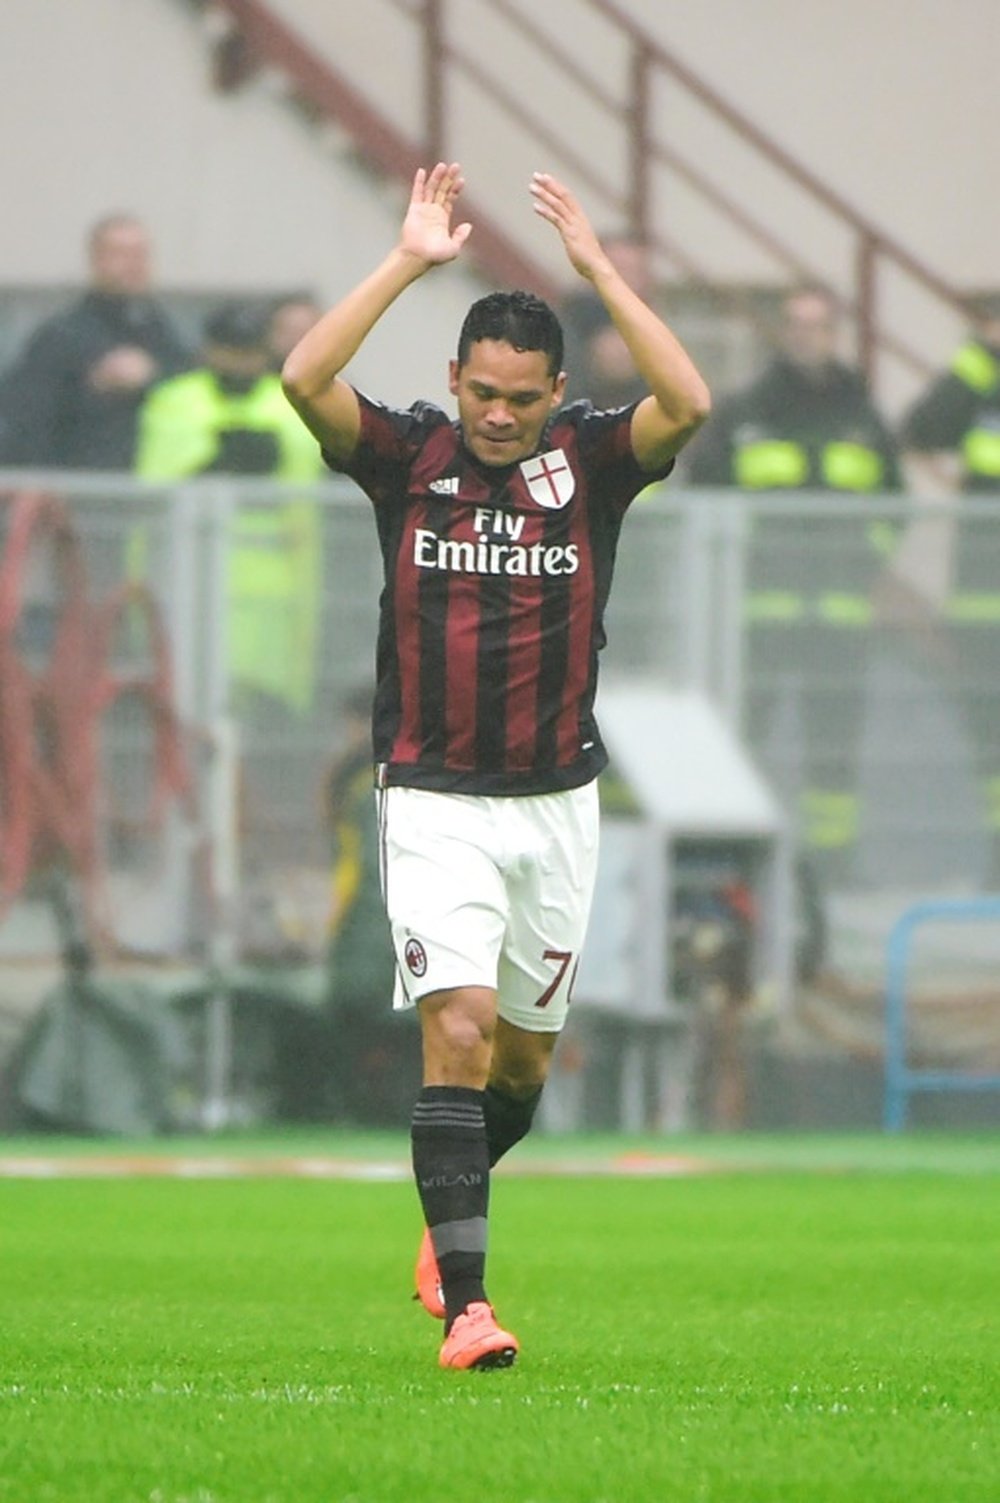 AC Milan forward Carlos Bacca celebrates the match's result: Sassuolo 0 AC Milan 1. AFP